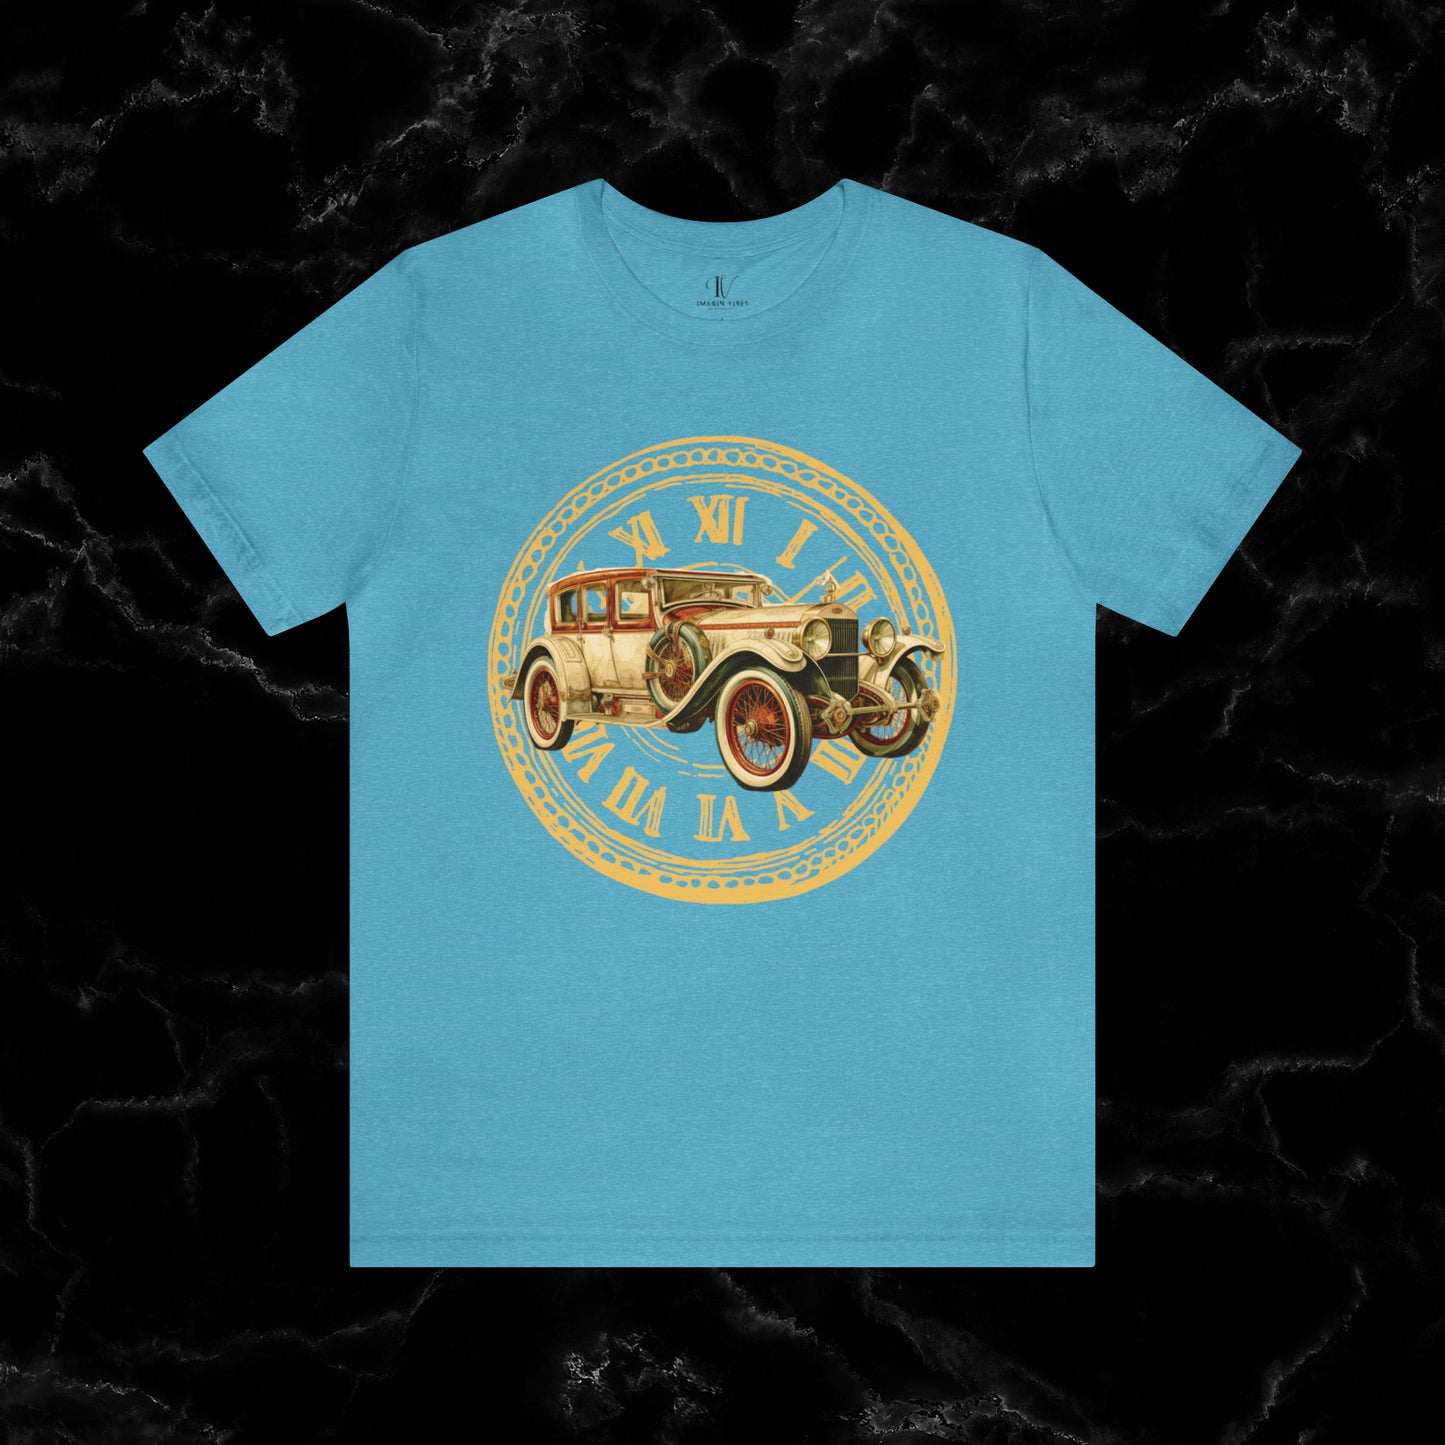 Vintage Car Enthusiast T-Shirt with Classic Wheels and Timeless Appeal T-Shirt Heather Aqua S 